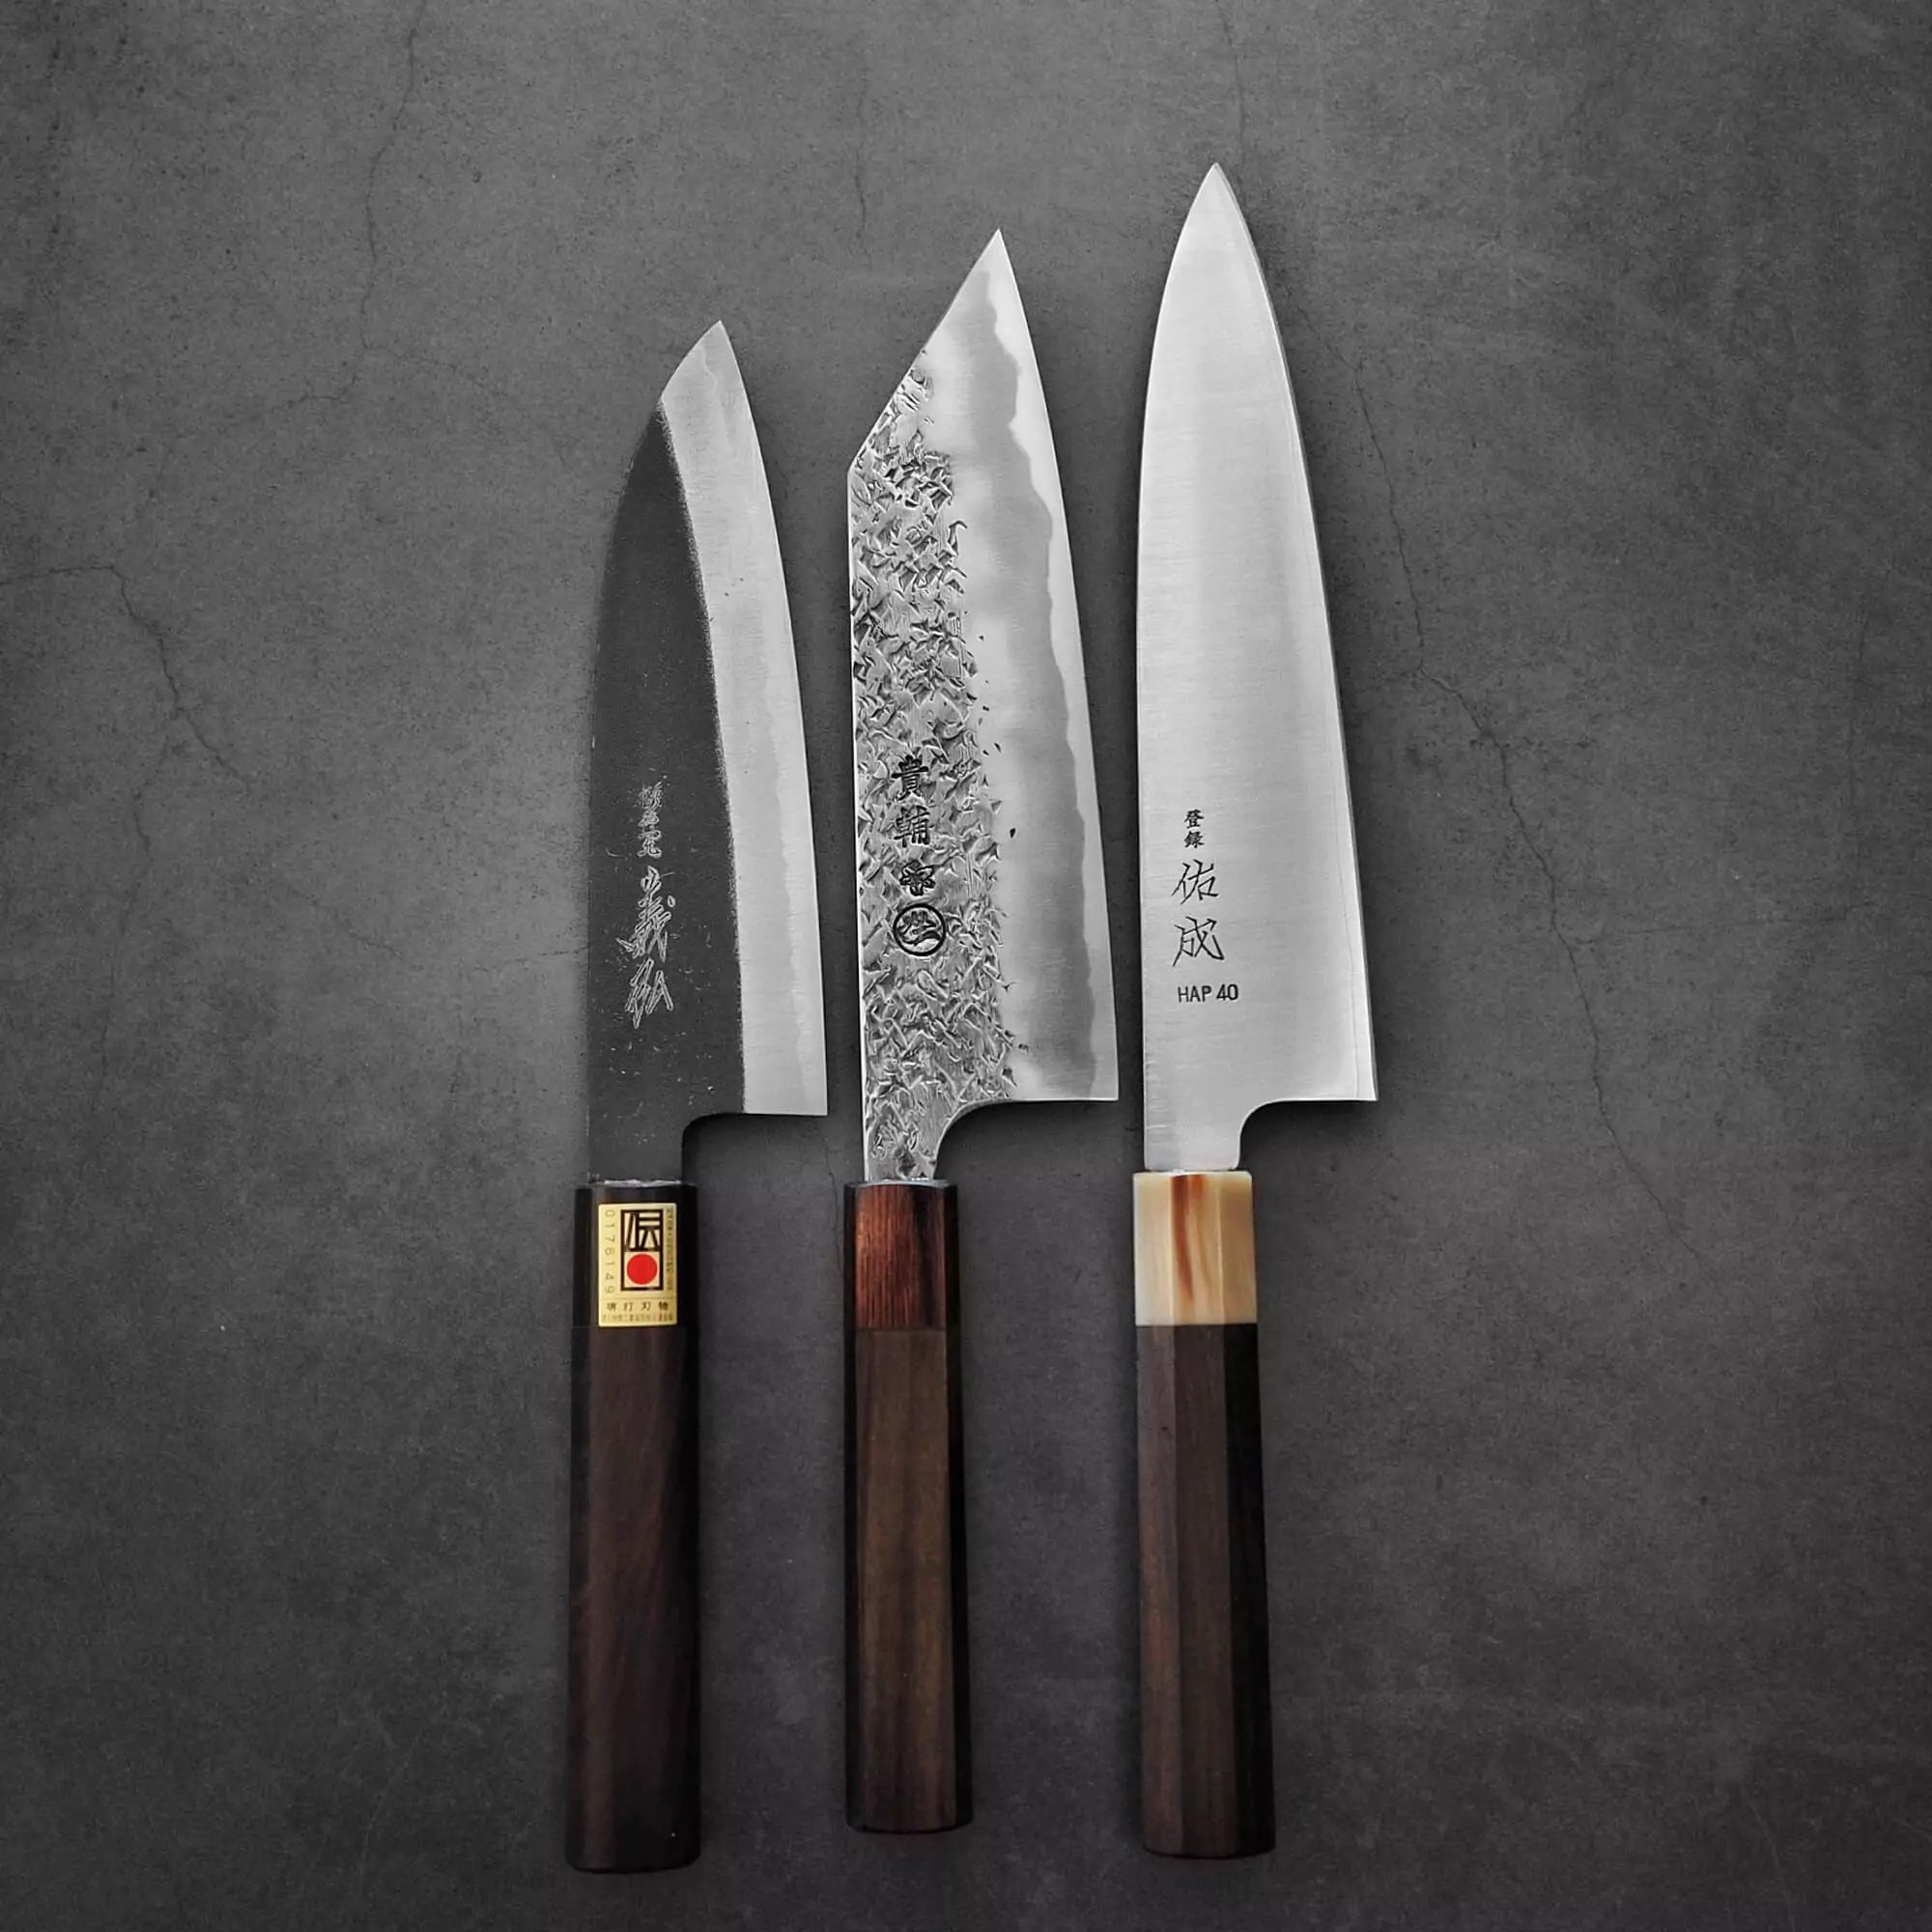 Three Japanese knives with varying blade textures and inscriptions, displayed against a grey stone background. Each knife has a wooden handle